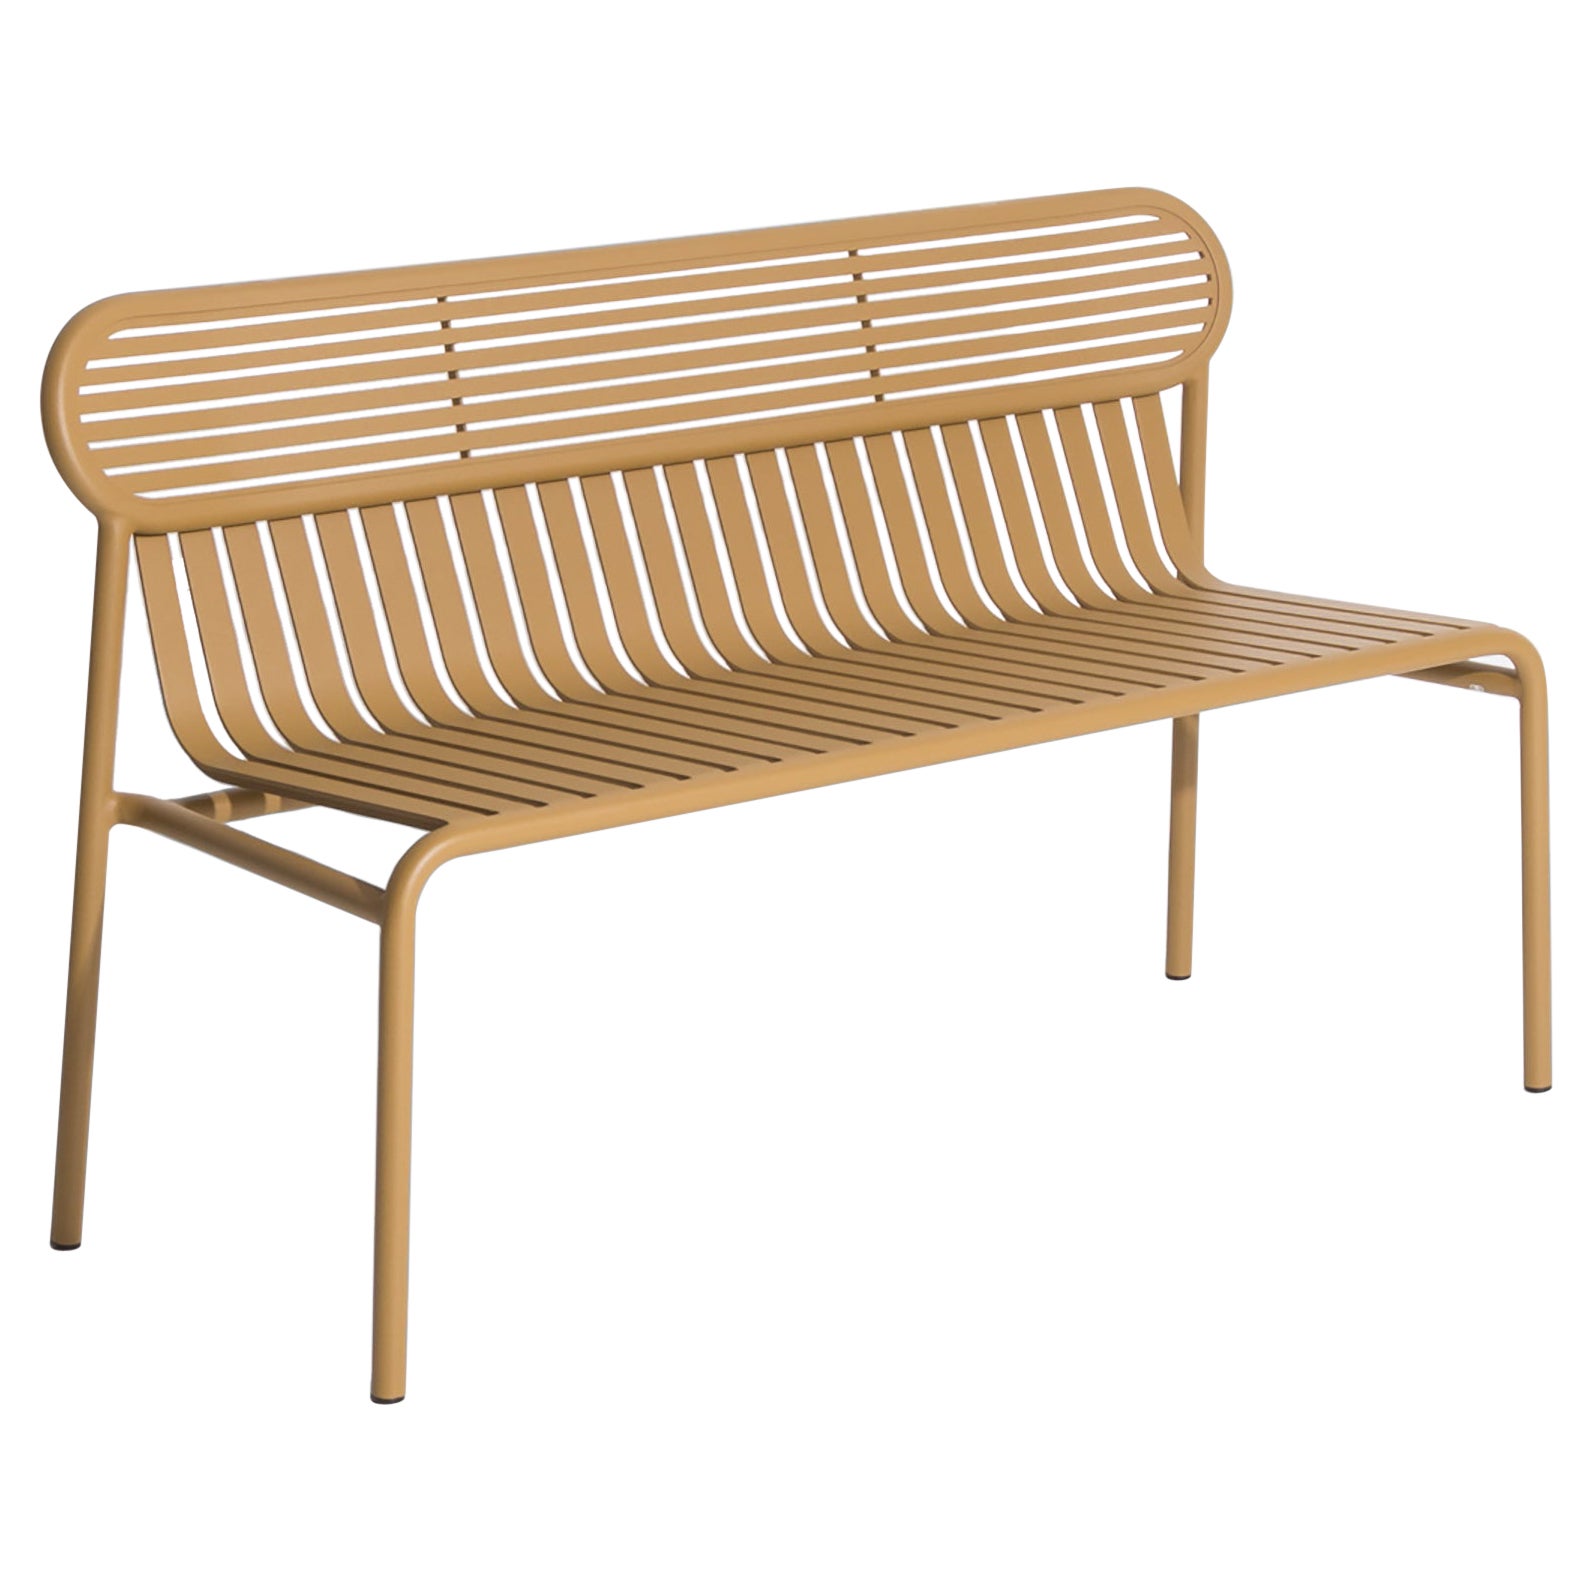 Petite Friture Week-End Bench in Gold Aluminium by Studio BrichetZiegler For Sale